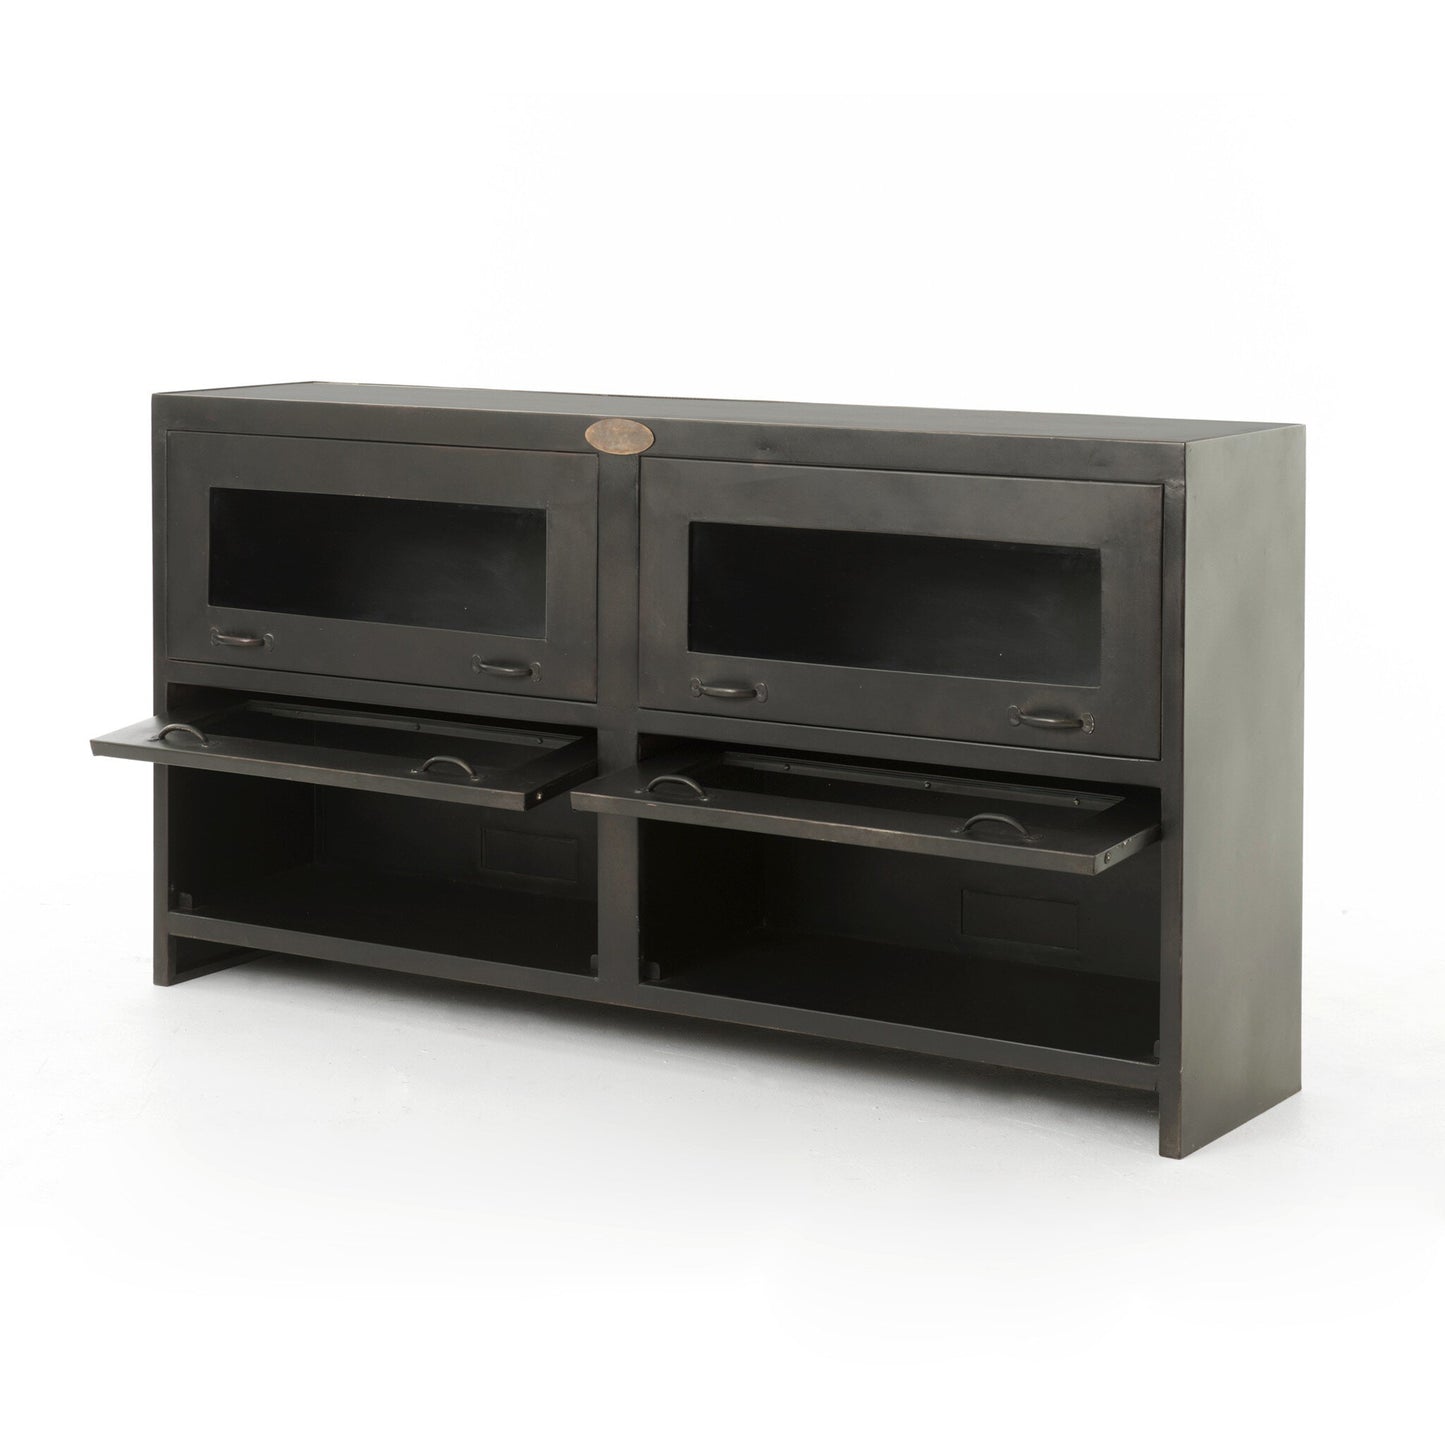 King Media Console